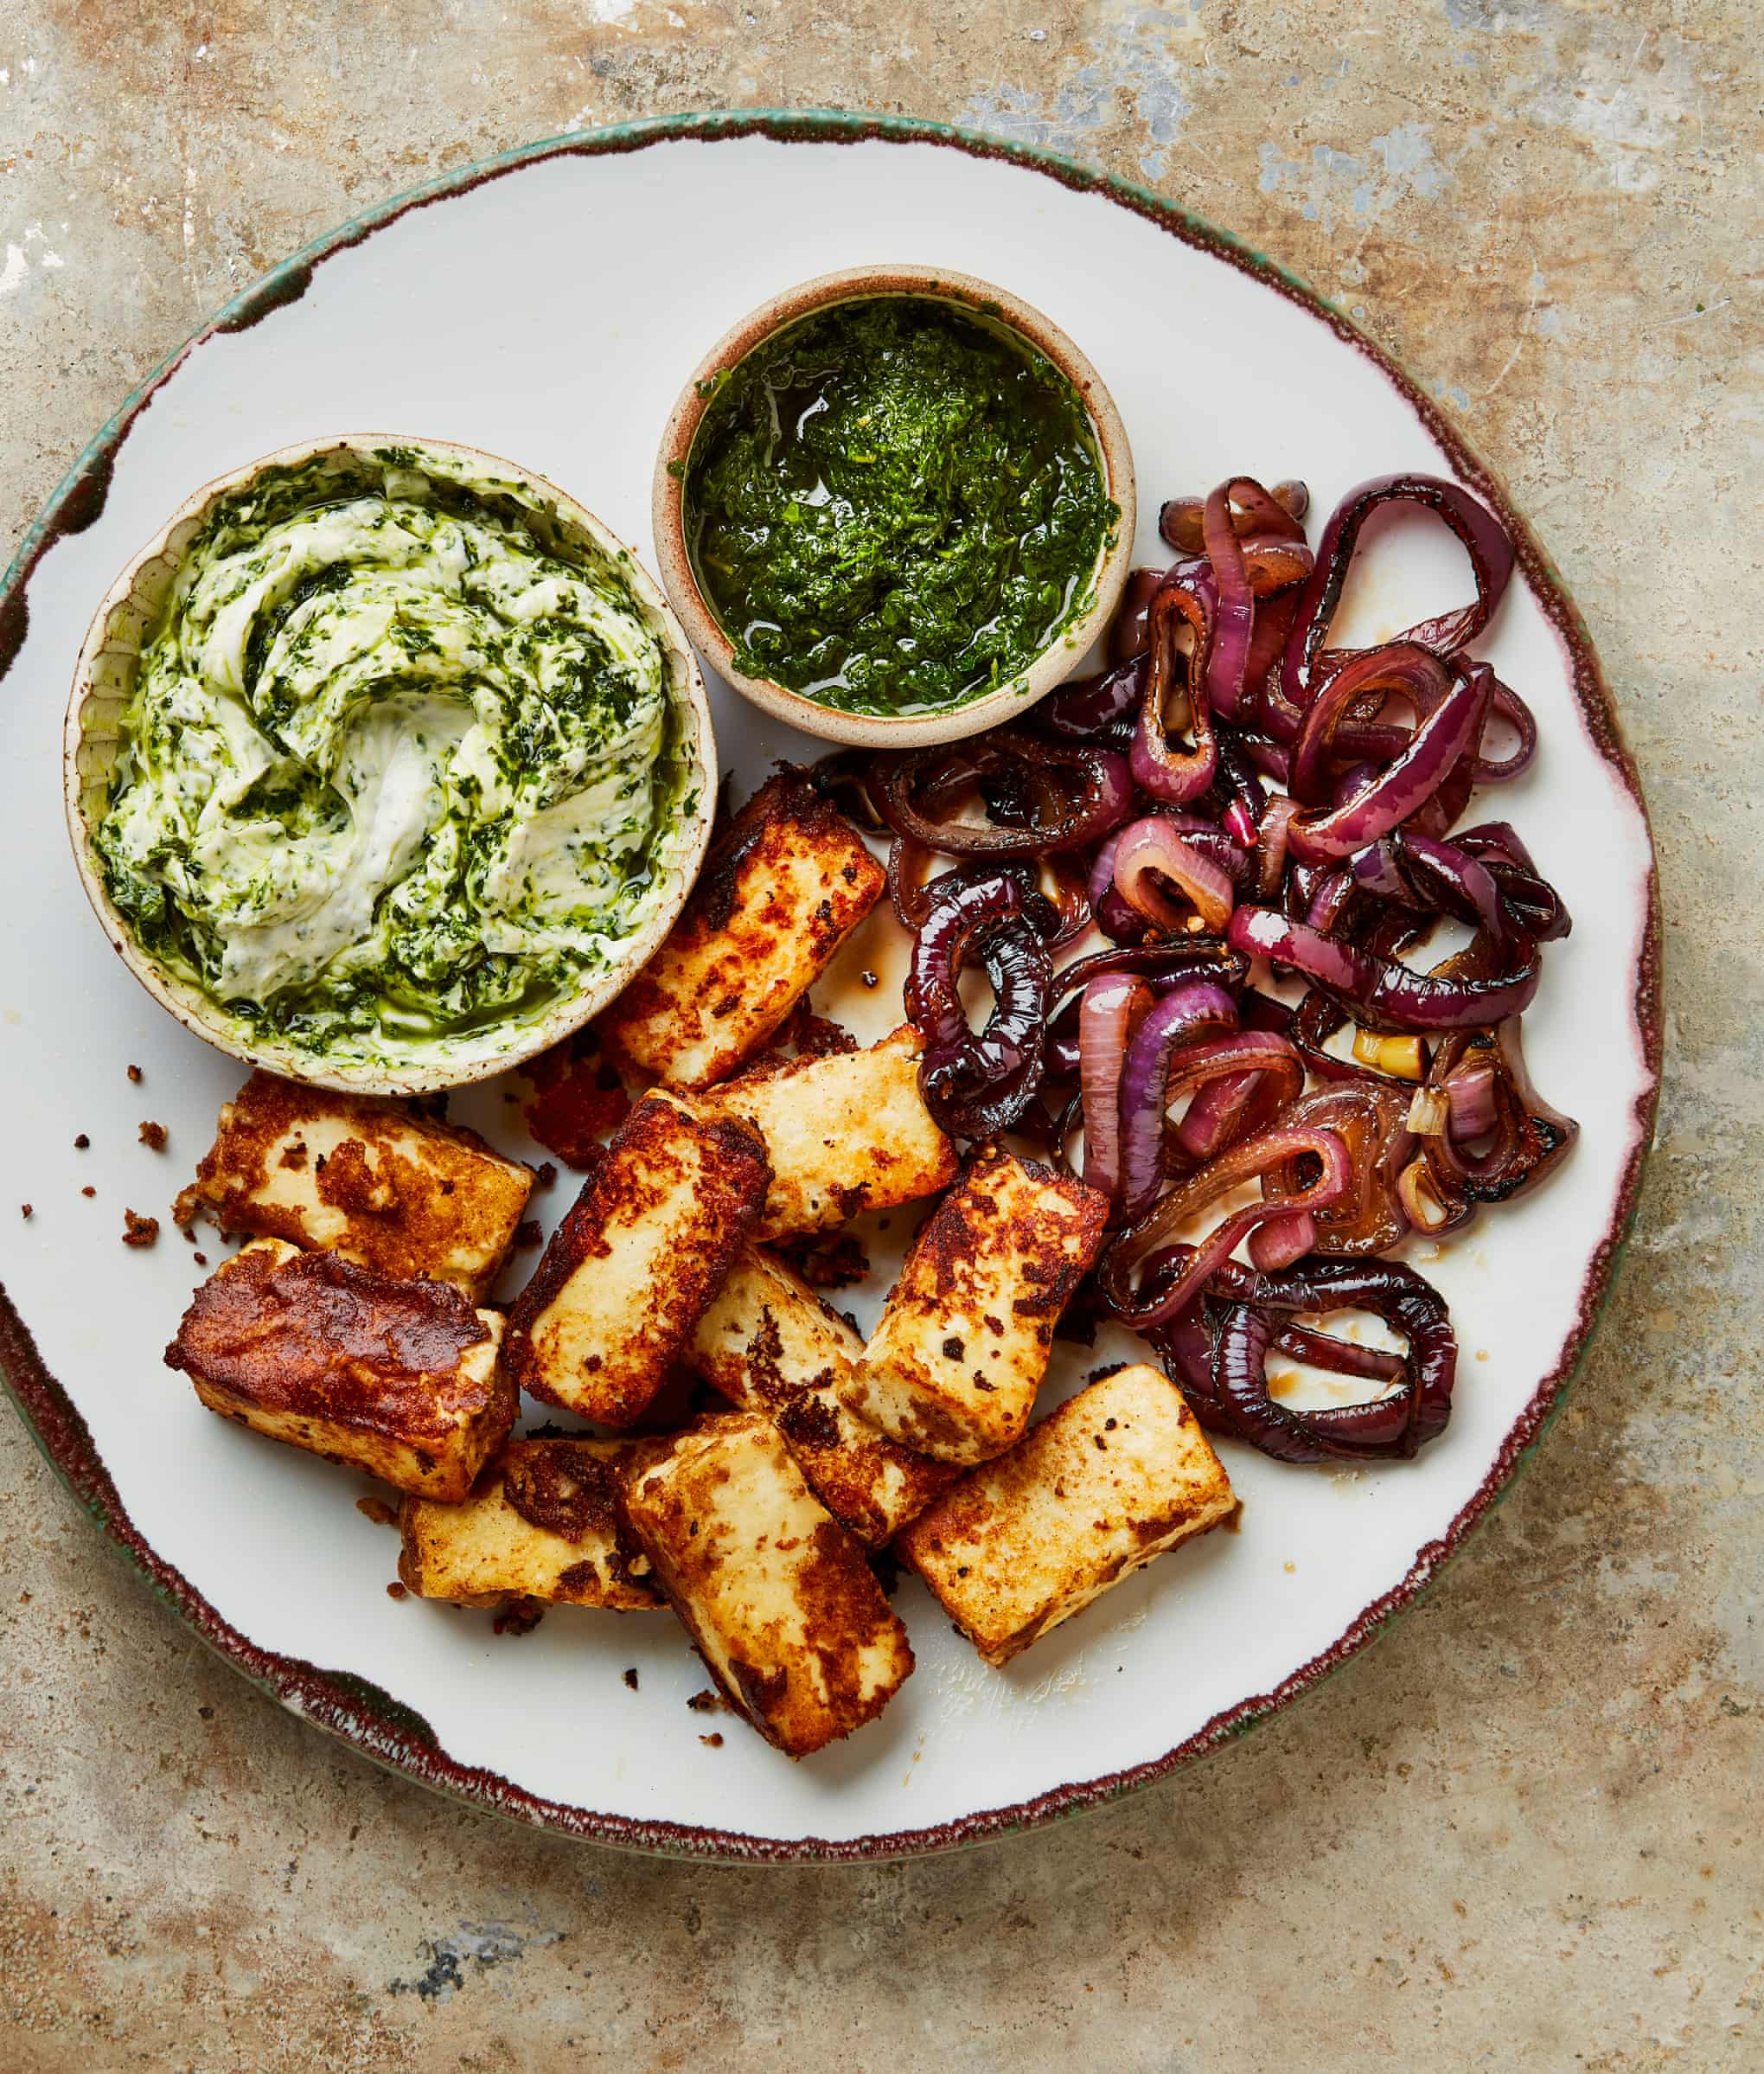 Koftas and spicy sauce: Yotam Ottolenghi’s recipes for homemade paneer